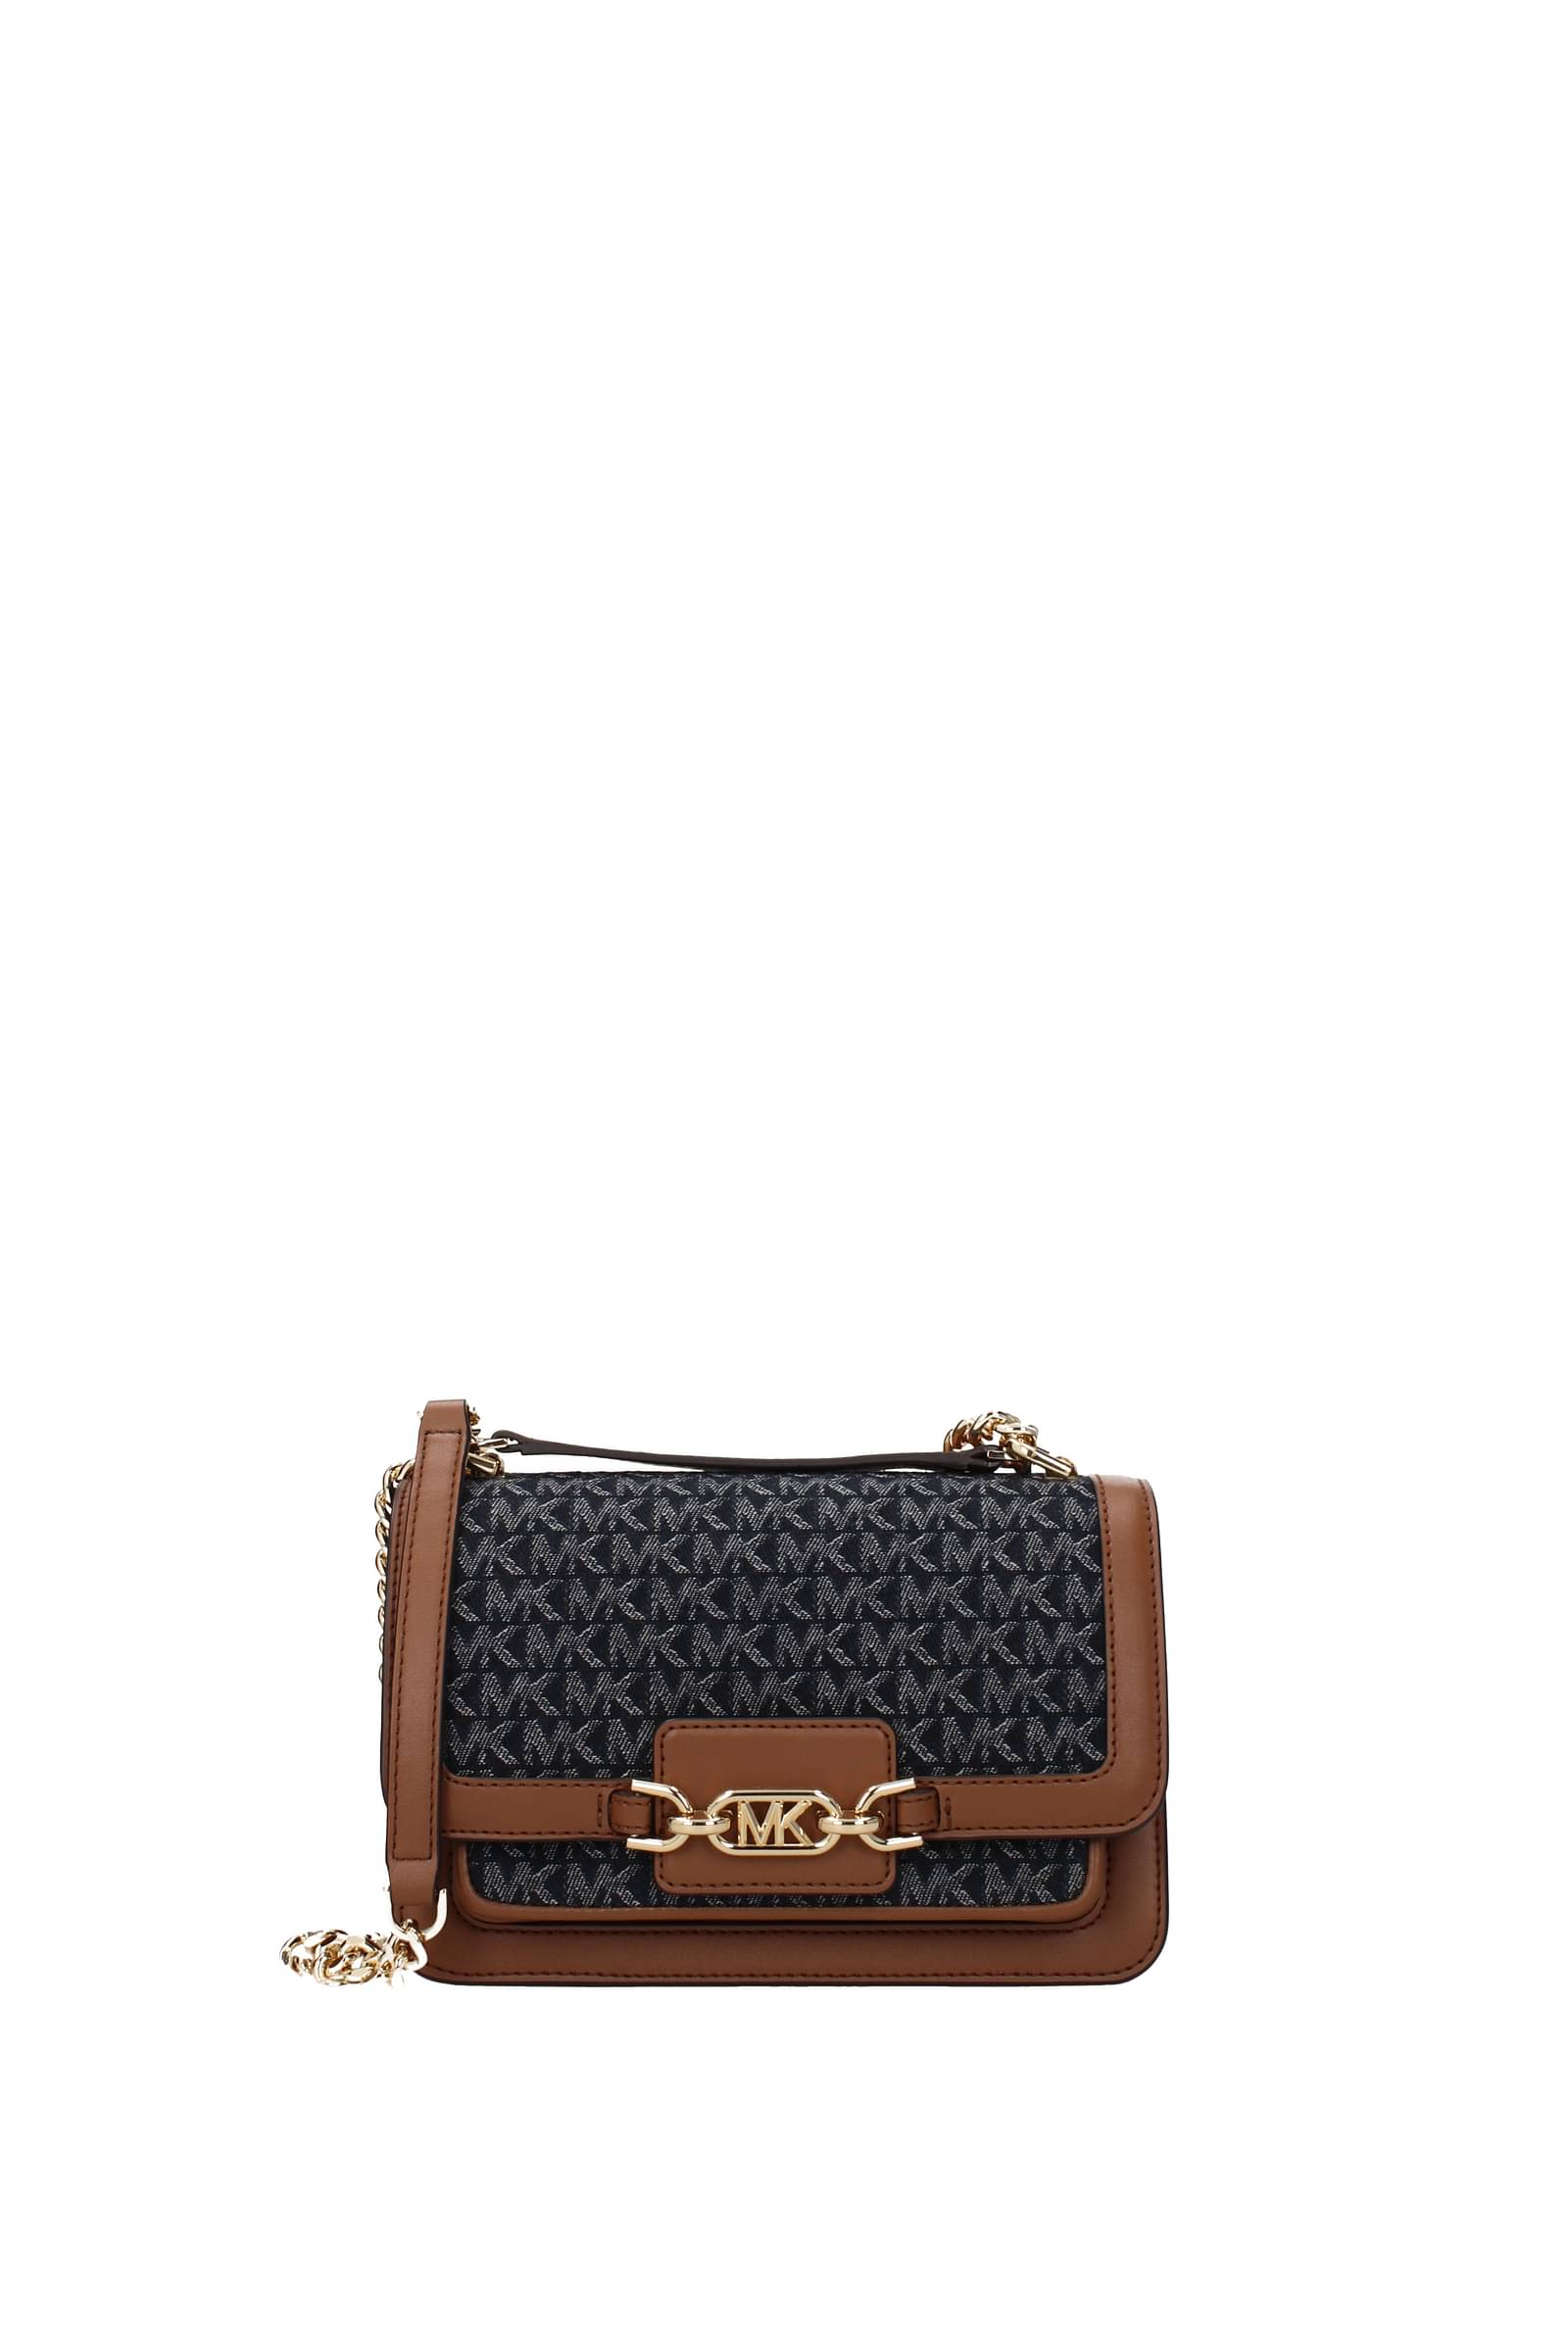  Michael Kors Outlet Mk Bags and Backpacks at the Best Price  EB